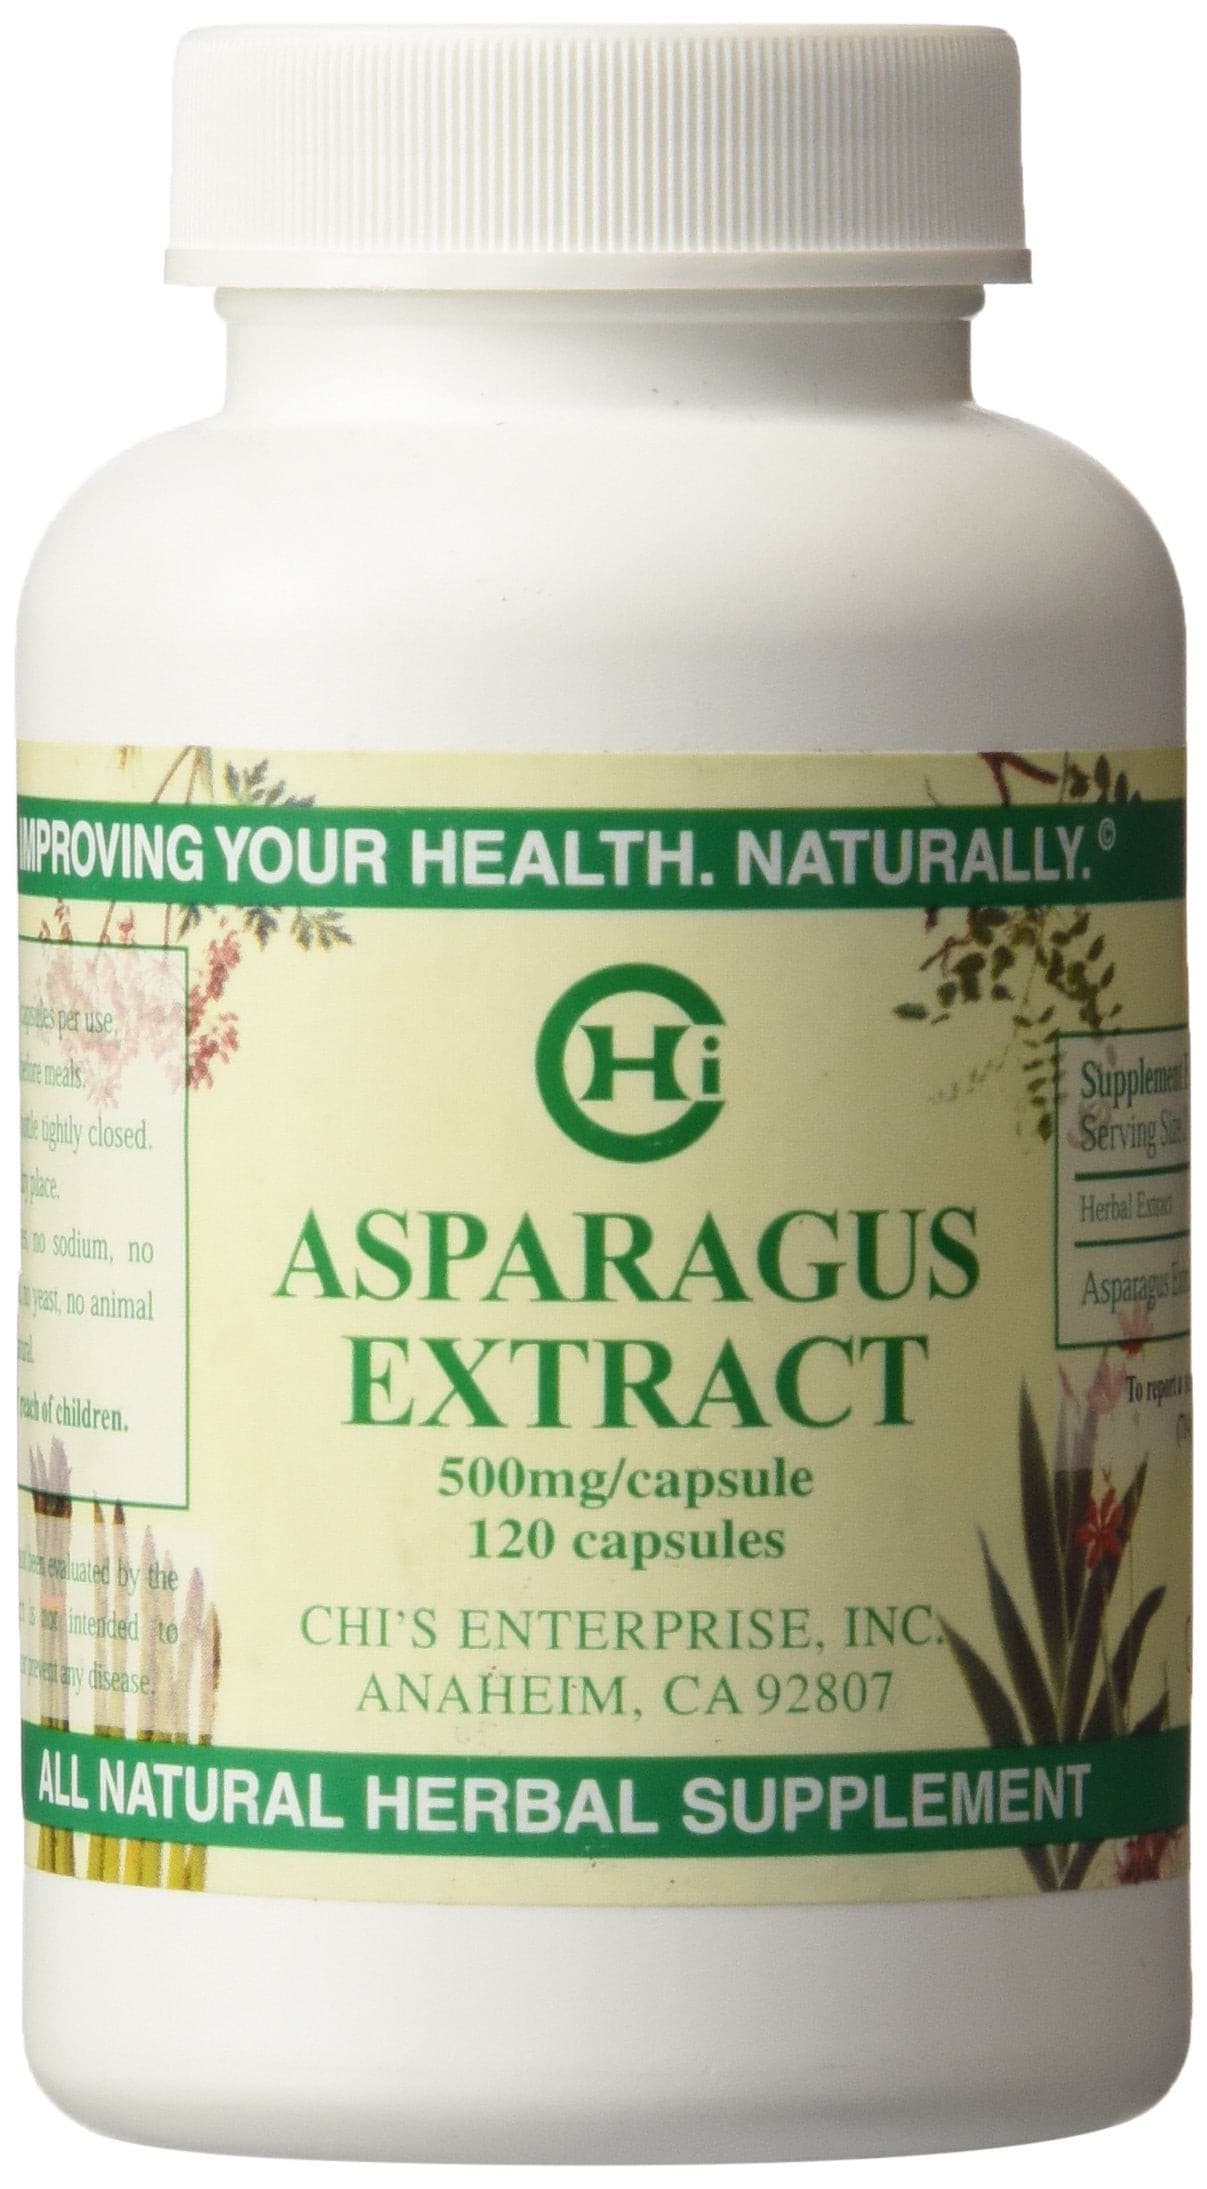 Asparagus Extract 120 Capsules.